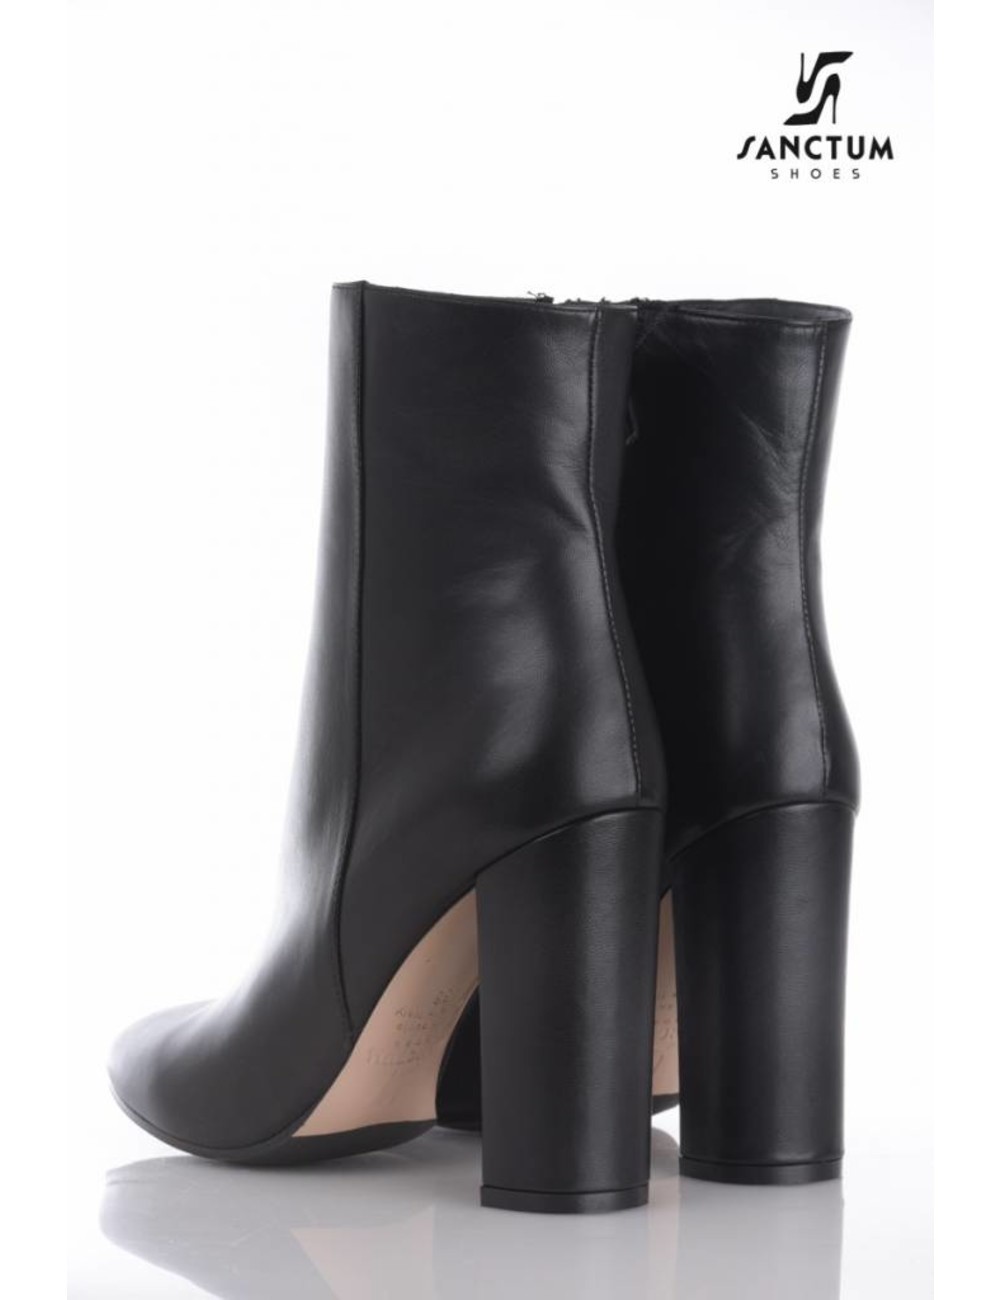 Sanctum Italian ankle boots with block heels made of genuine calf leather